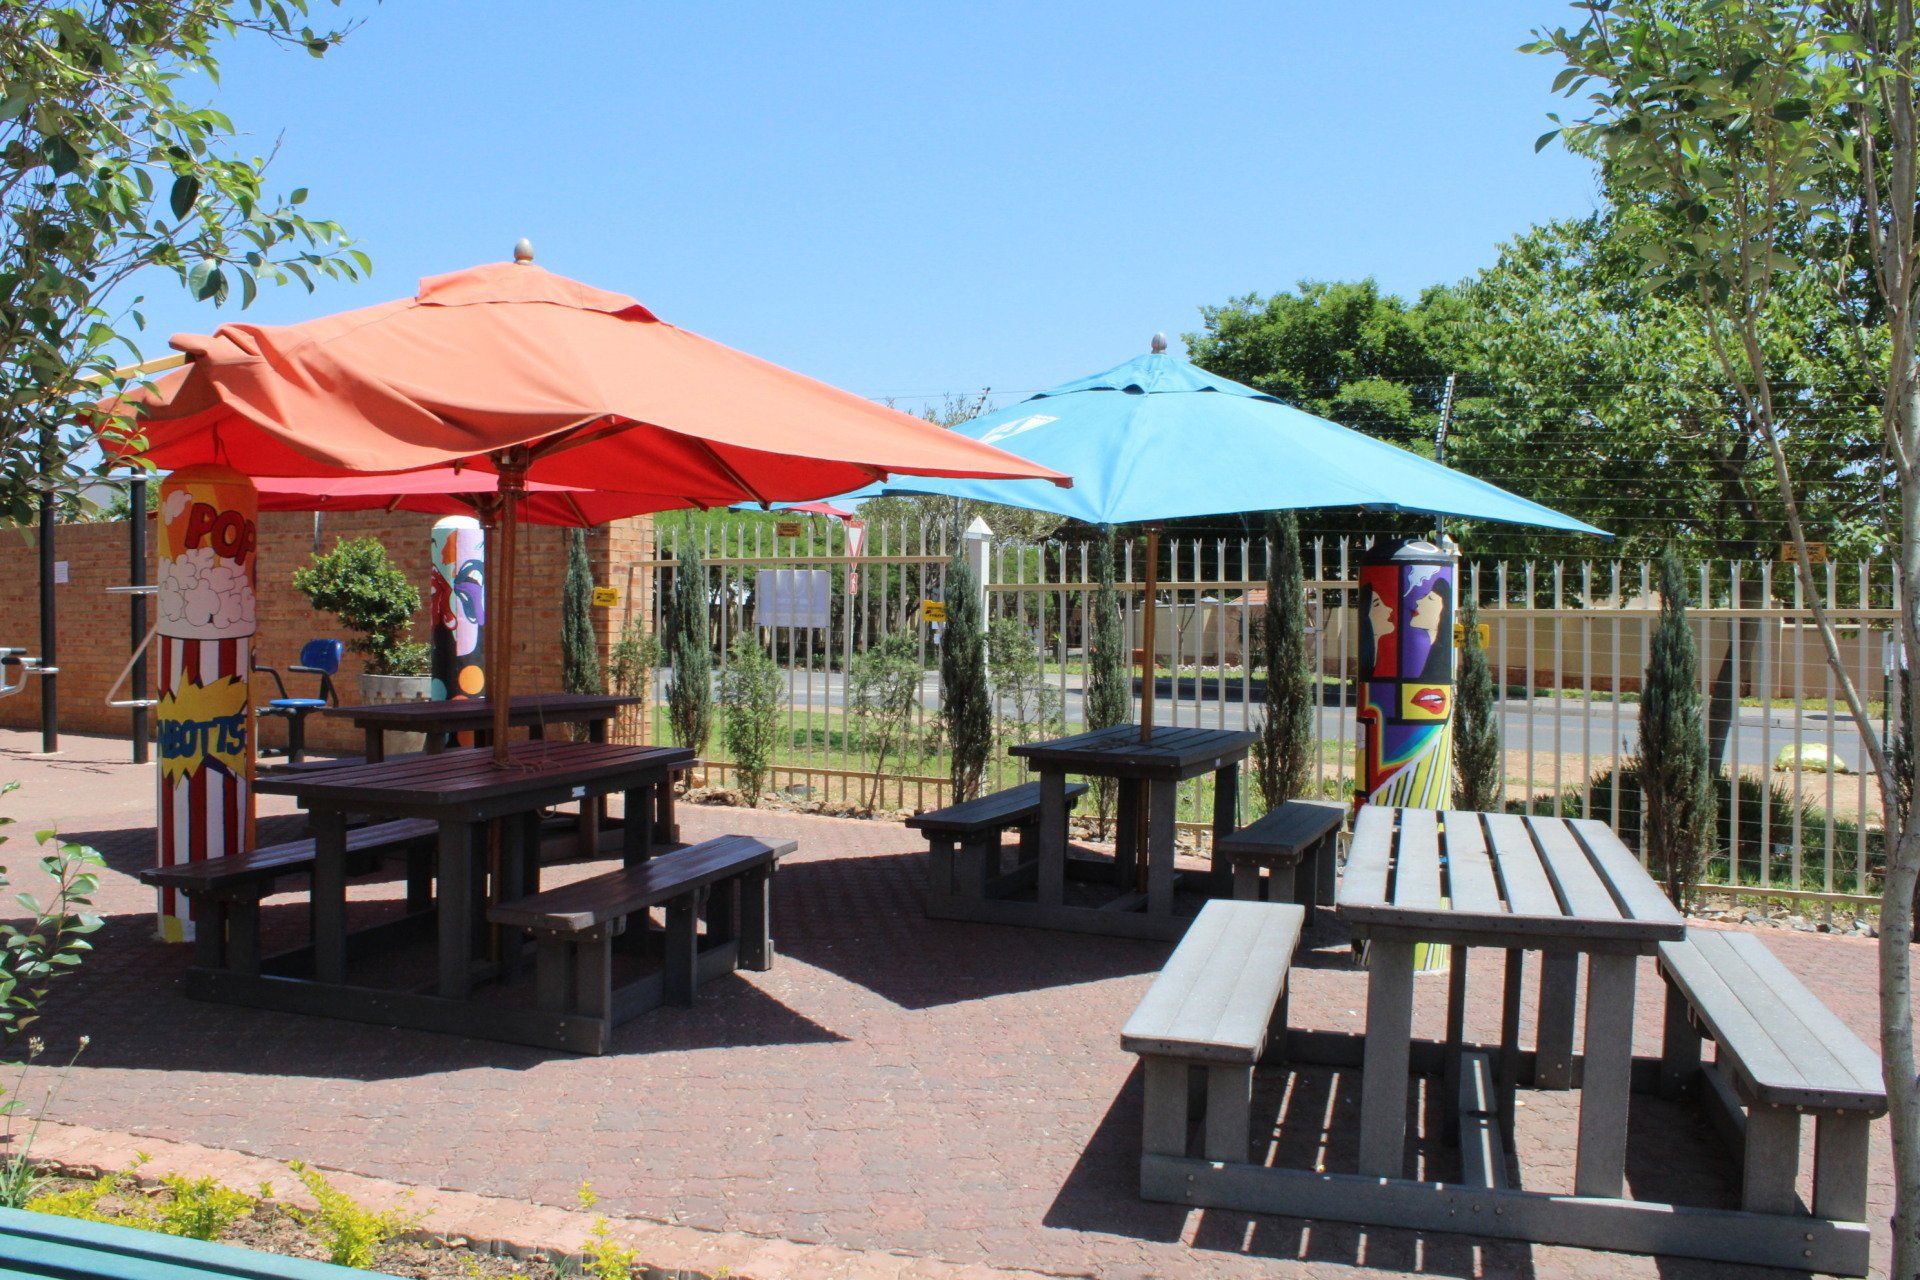 a picnic area with tables and umbrellas and a popcorn machine